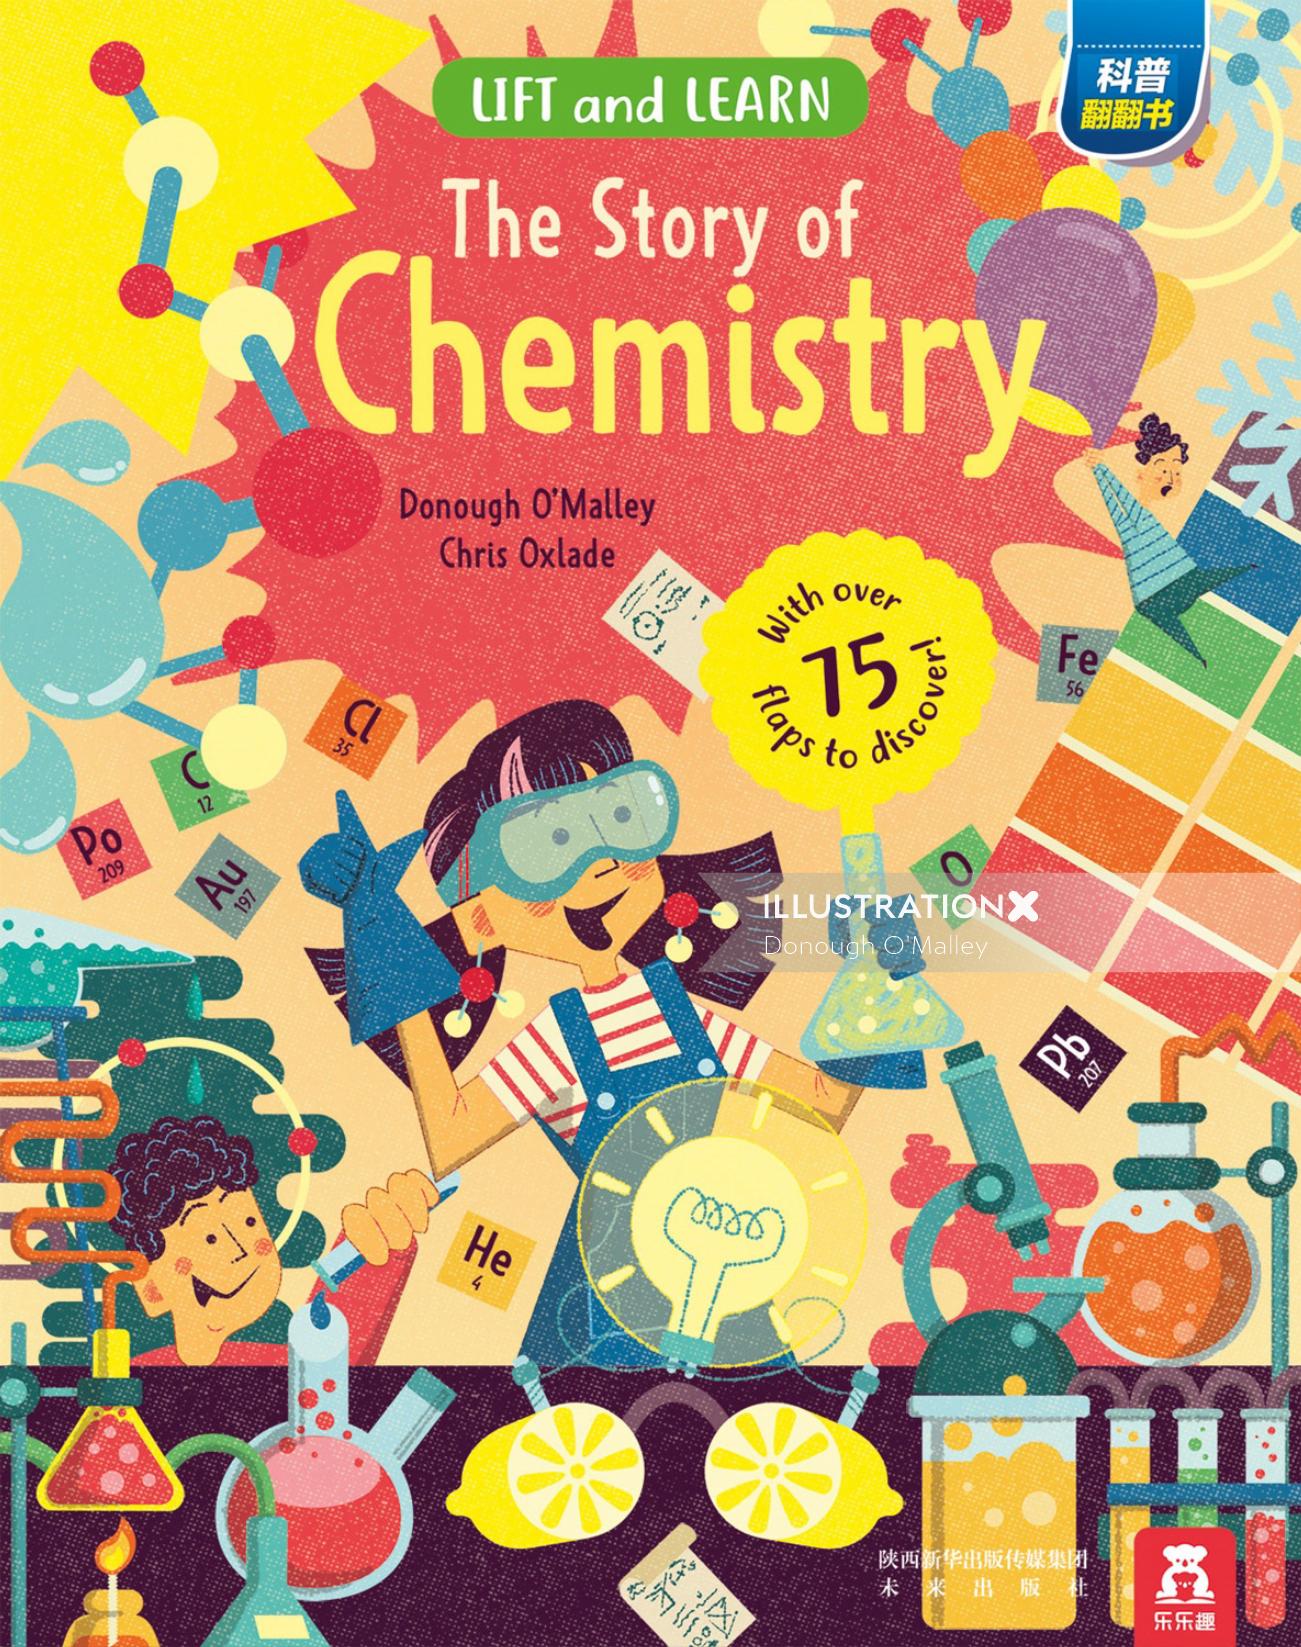 The story of chemistry book
